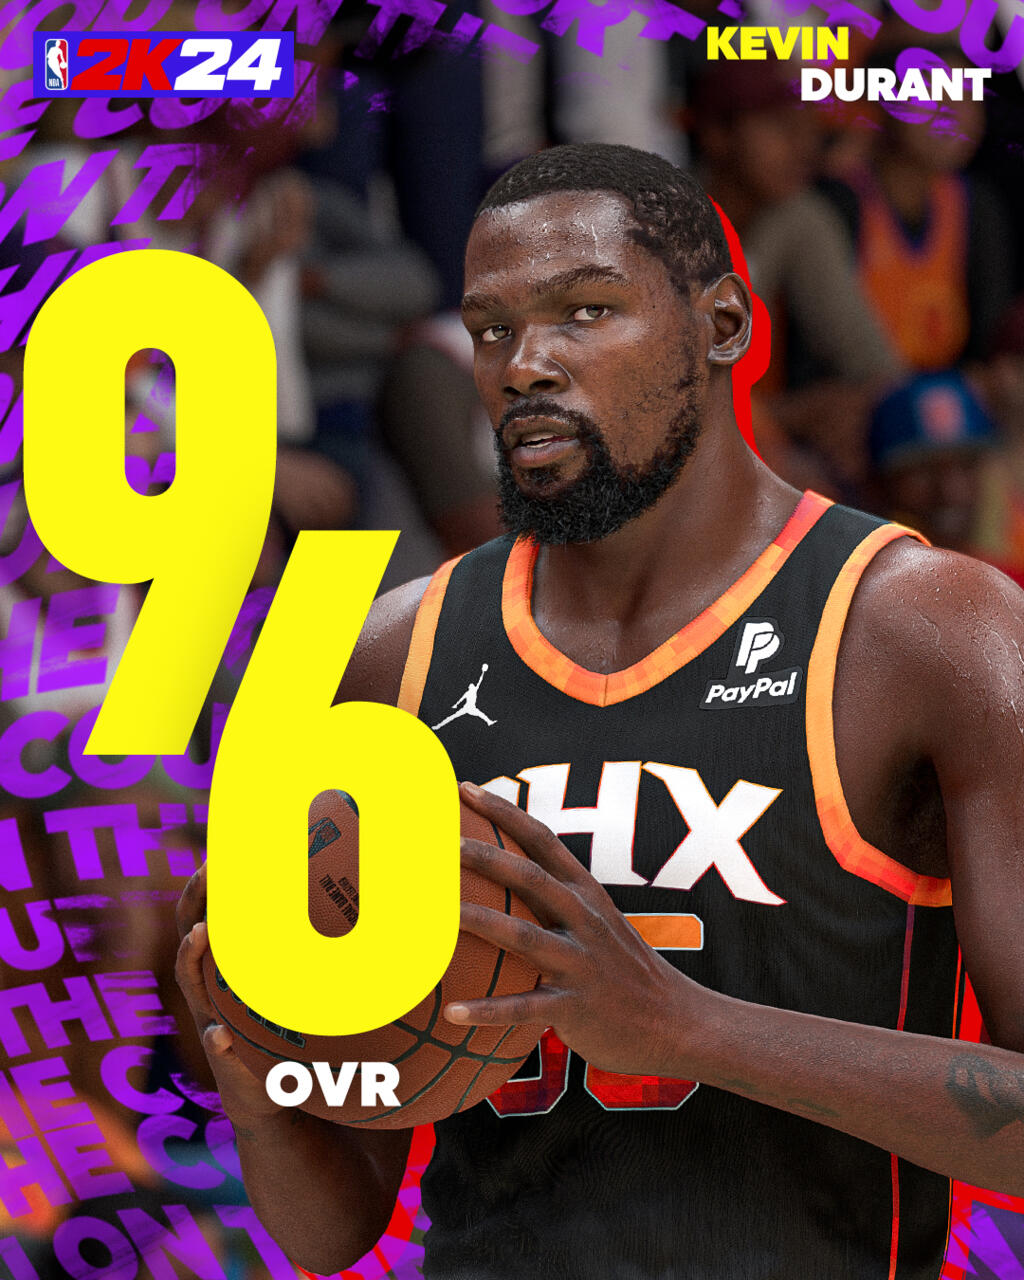 Kevin Durant - 96 OVR